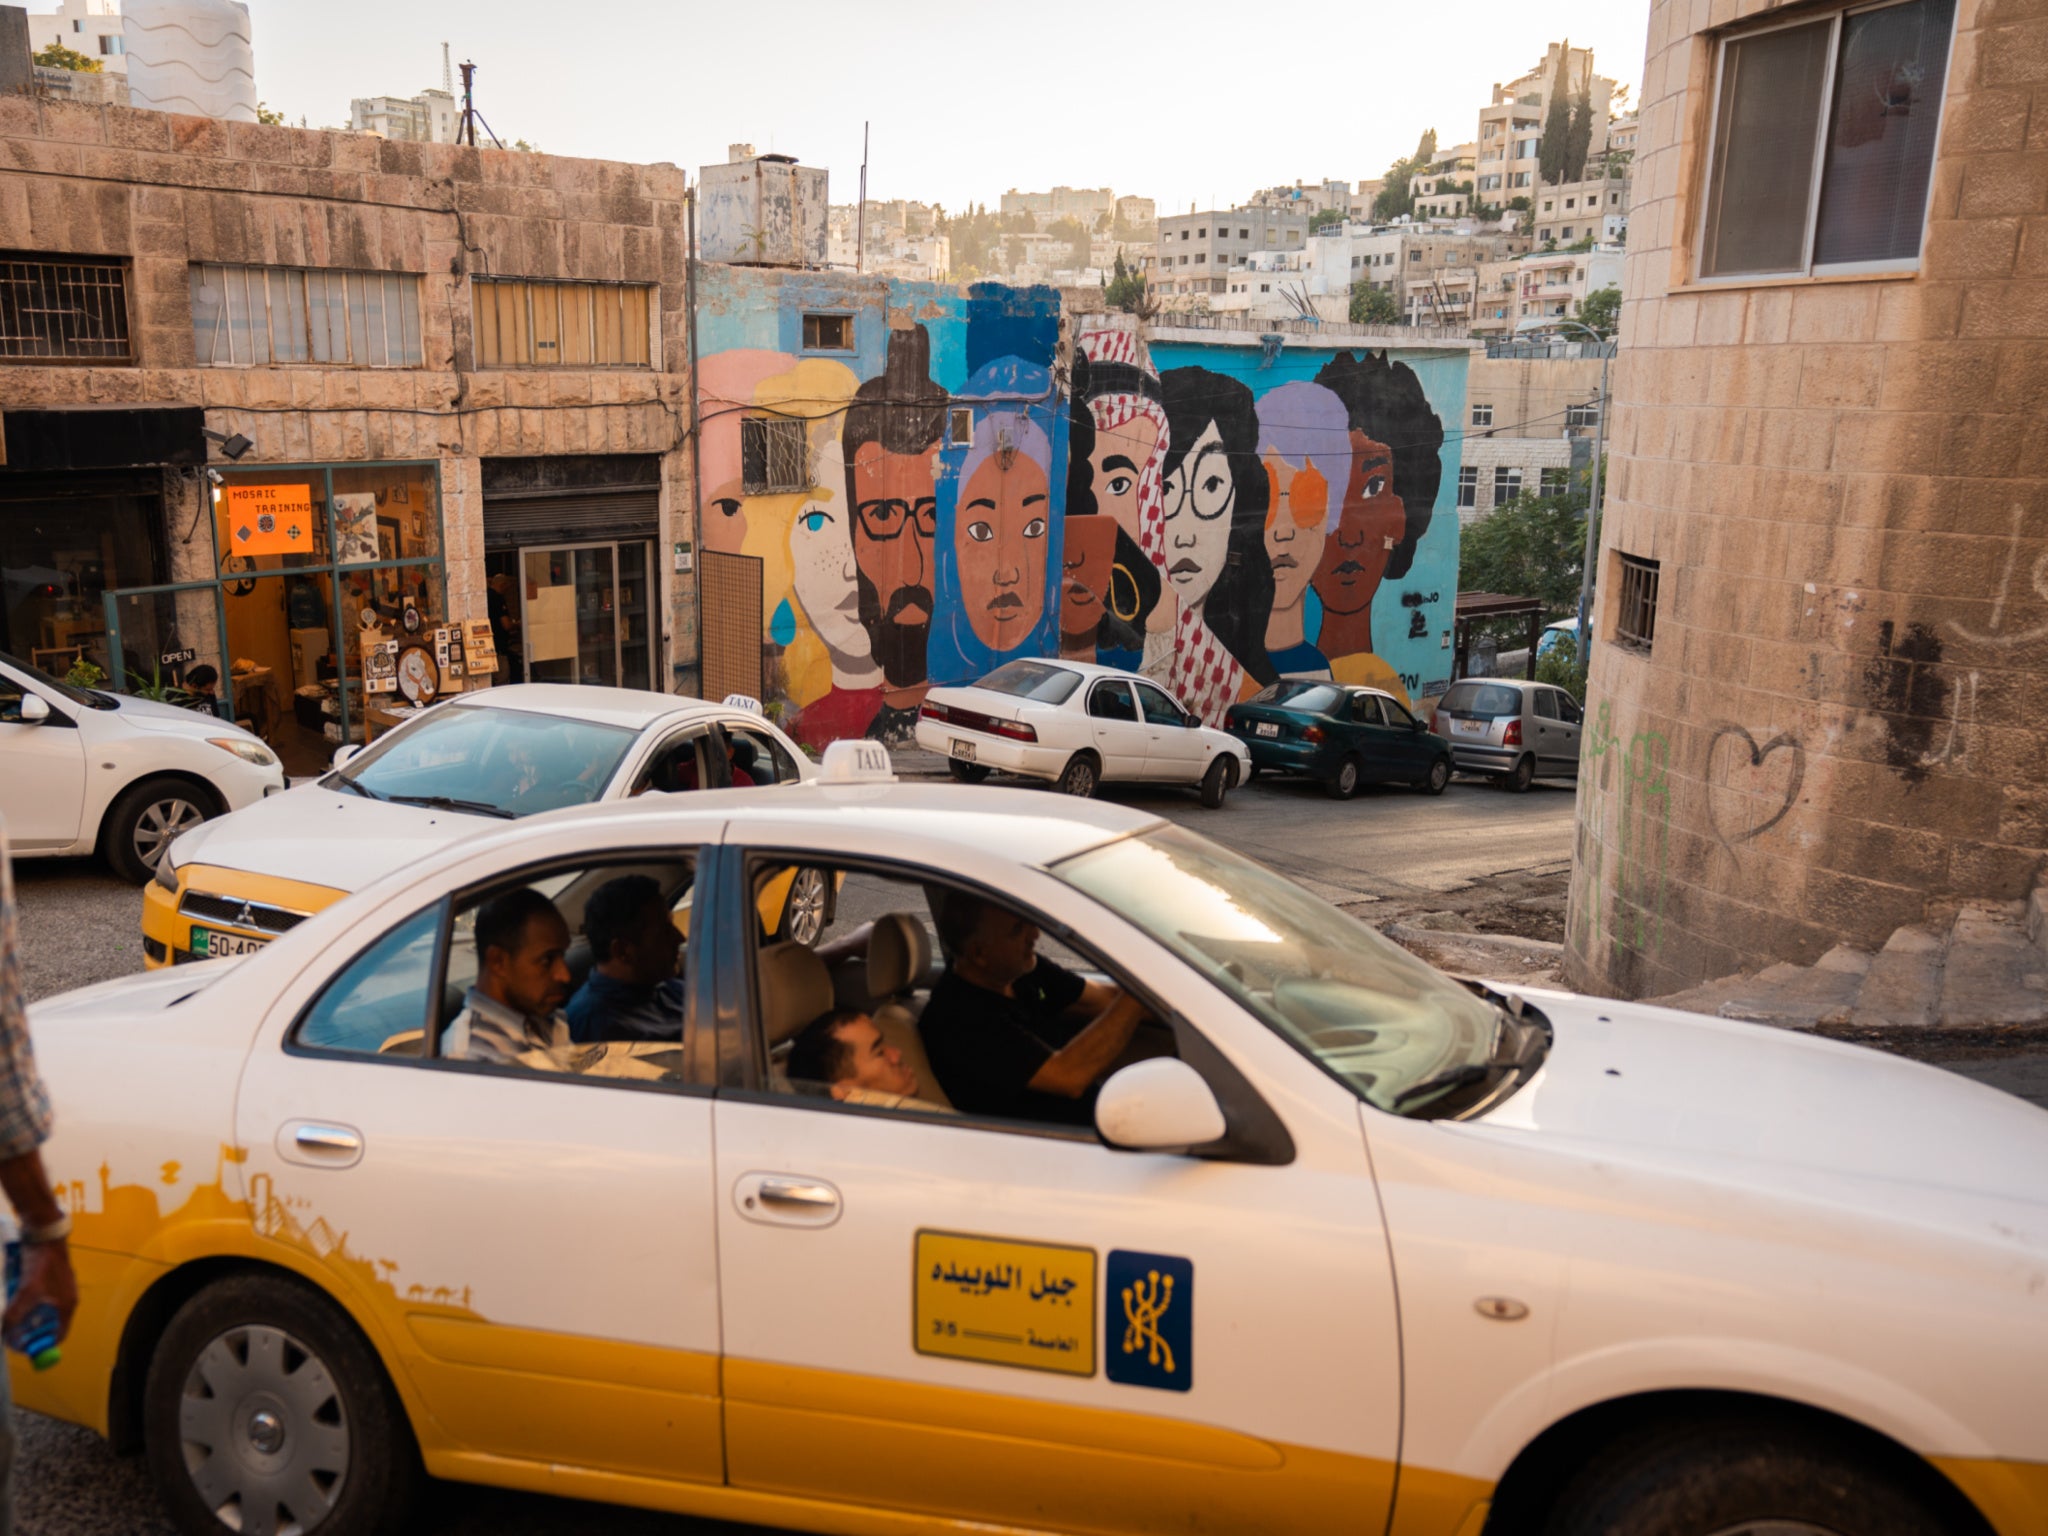 Jordan is brimming with colourful graffiti and street art